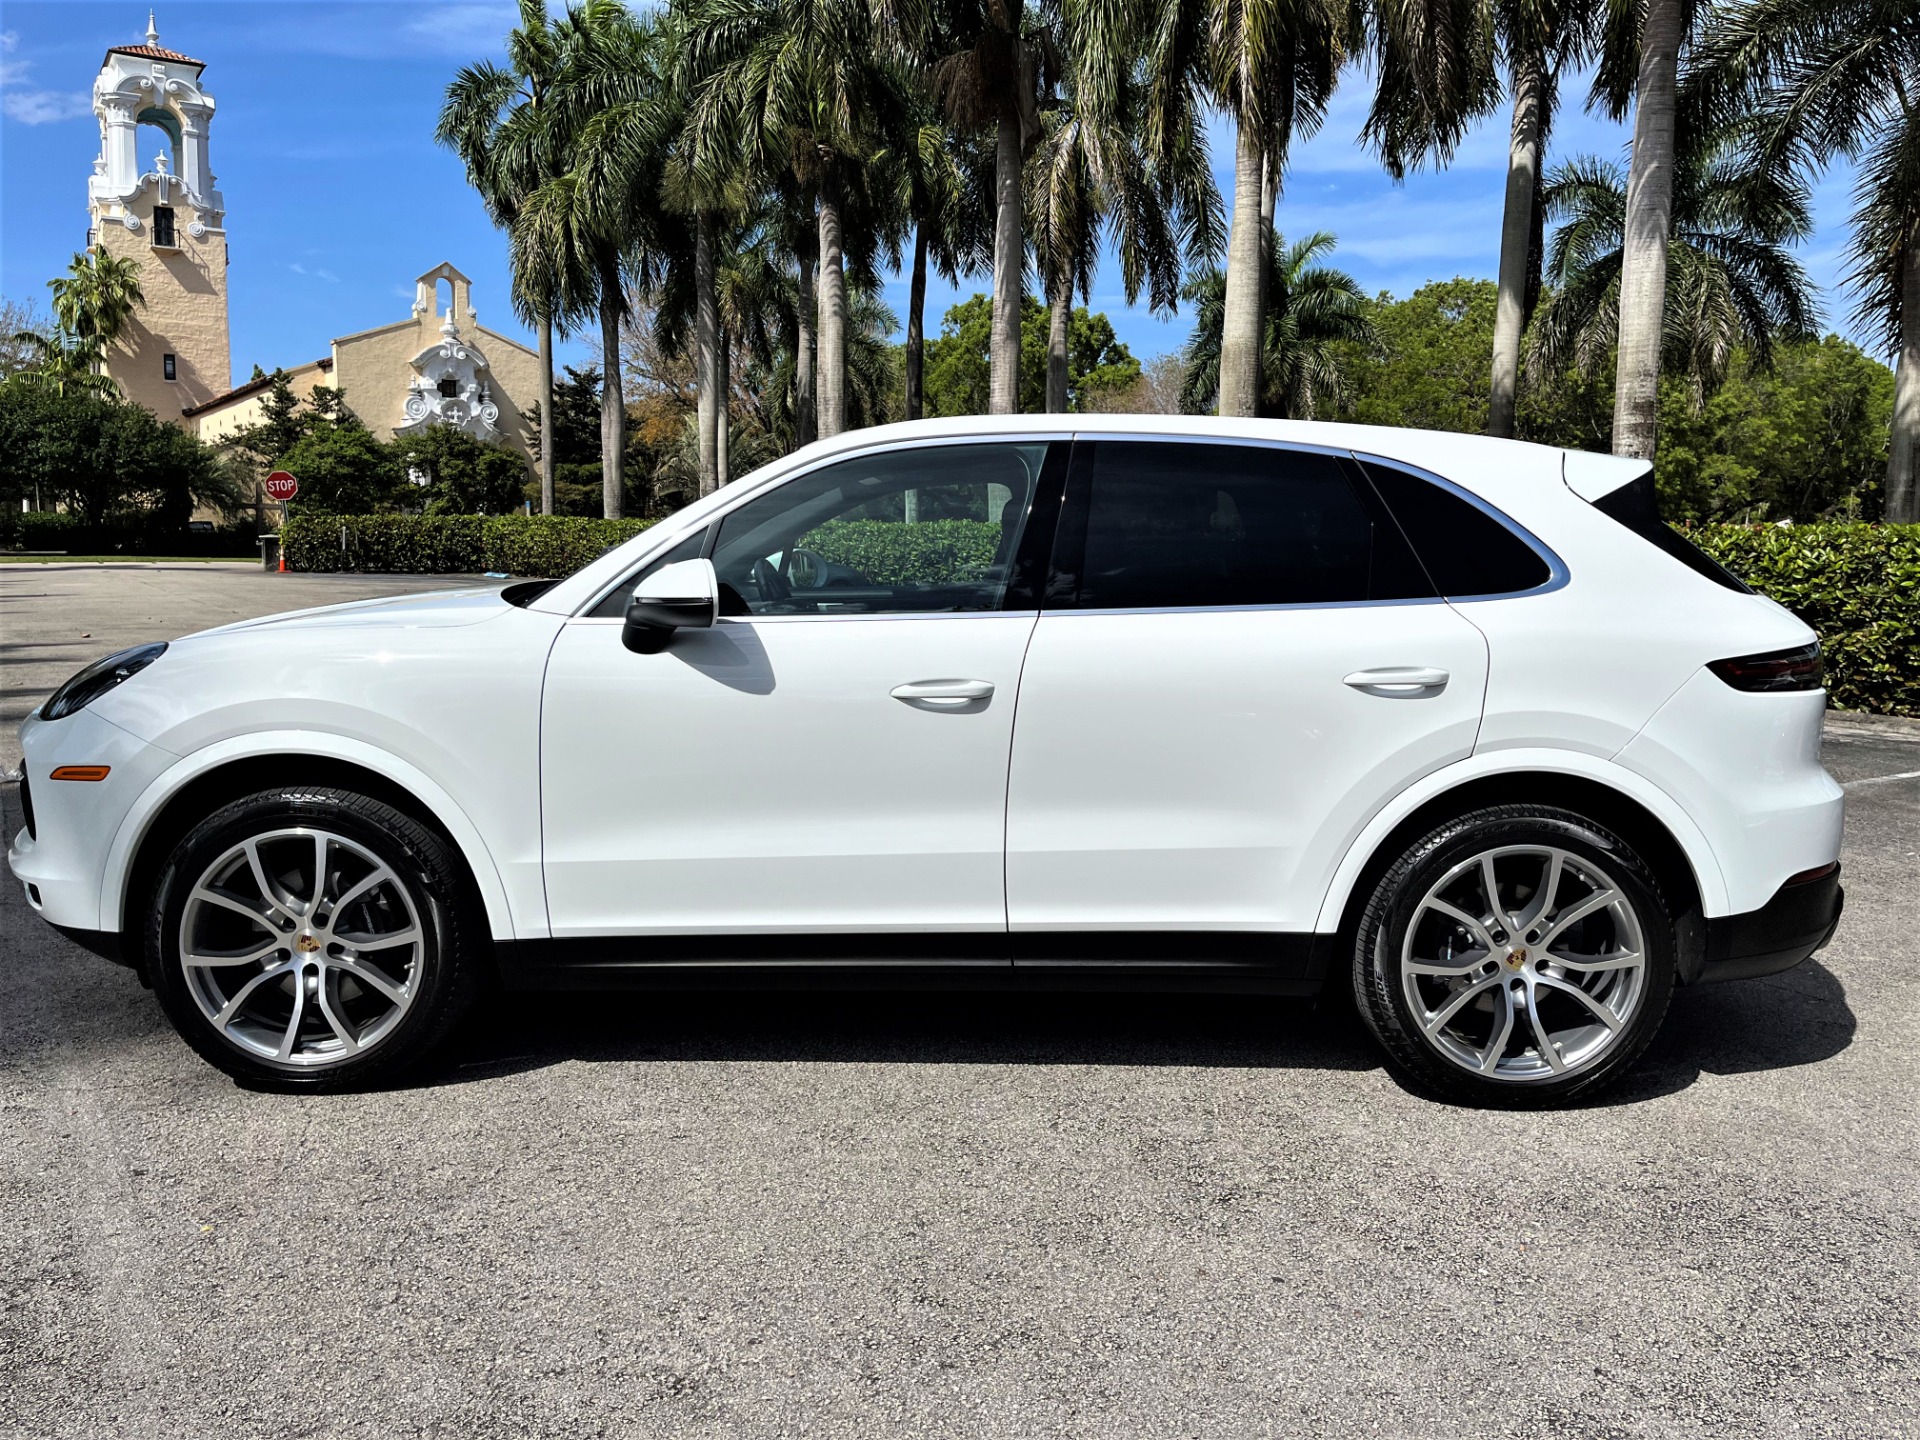 Used 2019 Porsche Cayenne for sale Sold at The Gables Sports Cars in Miami FL 33146 4